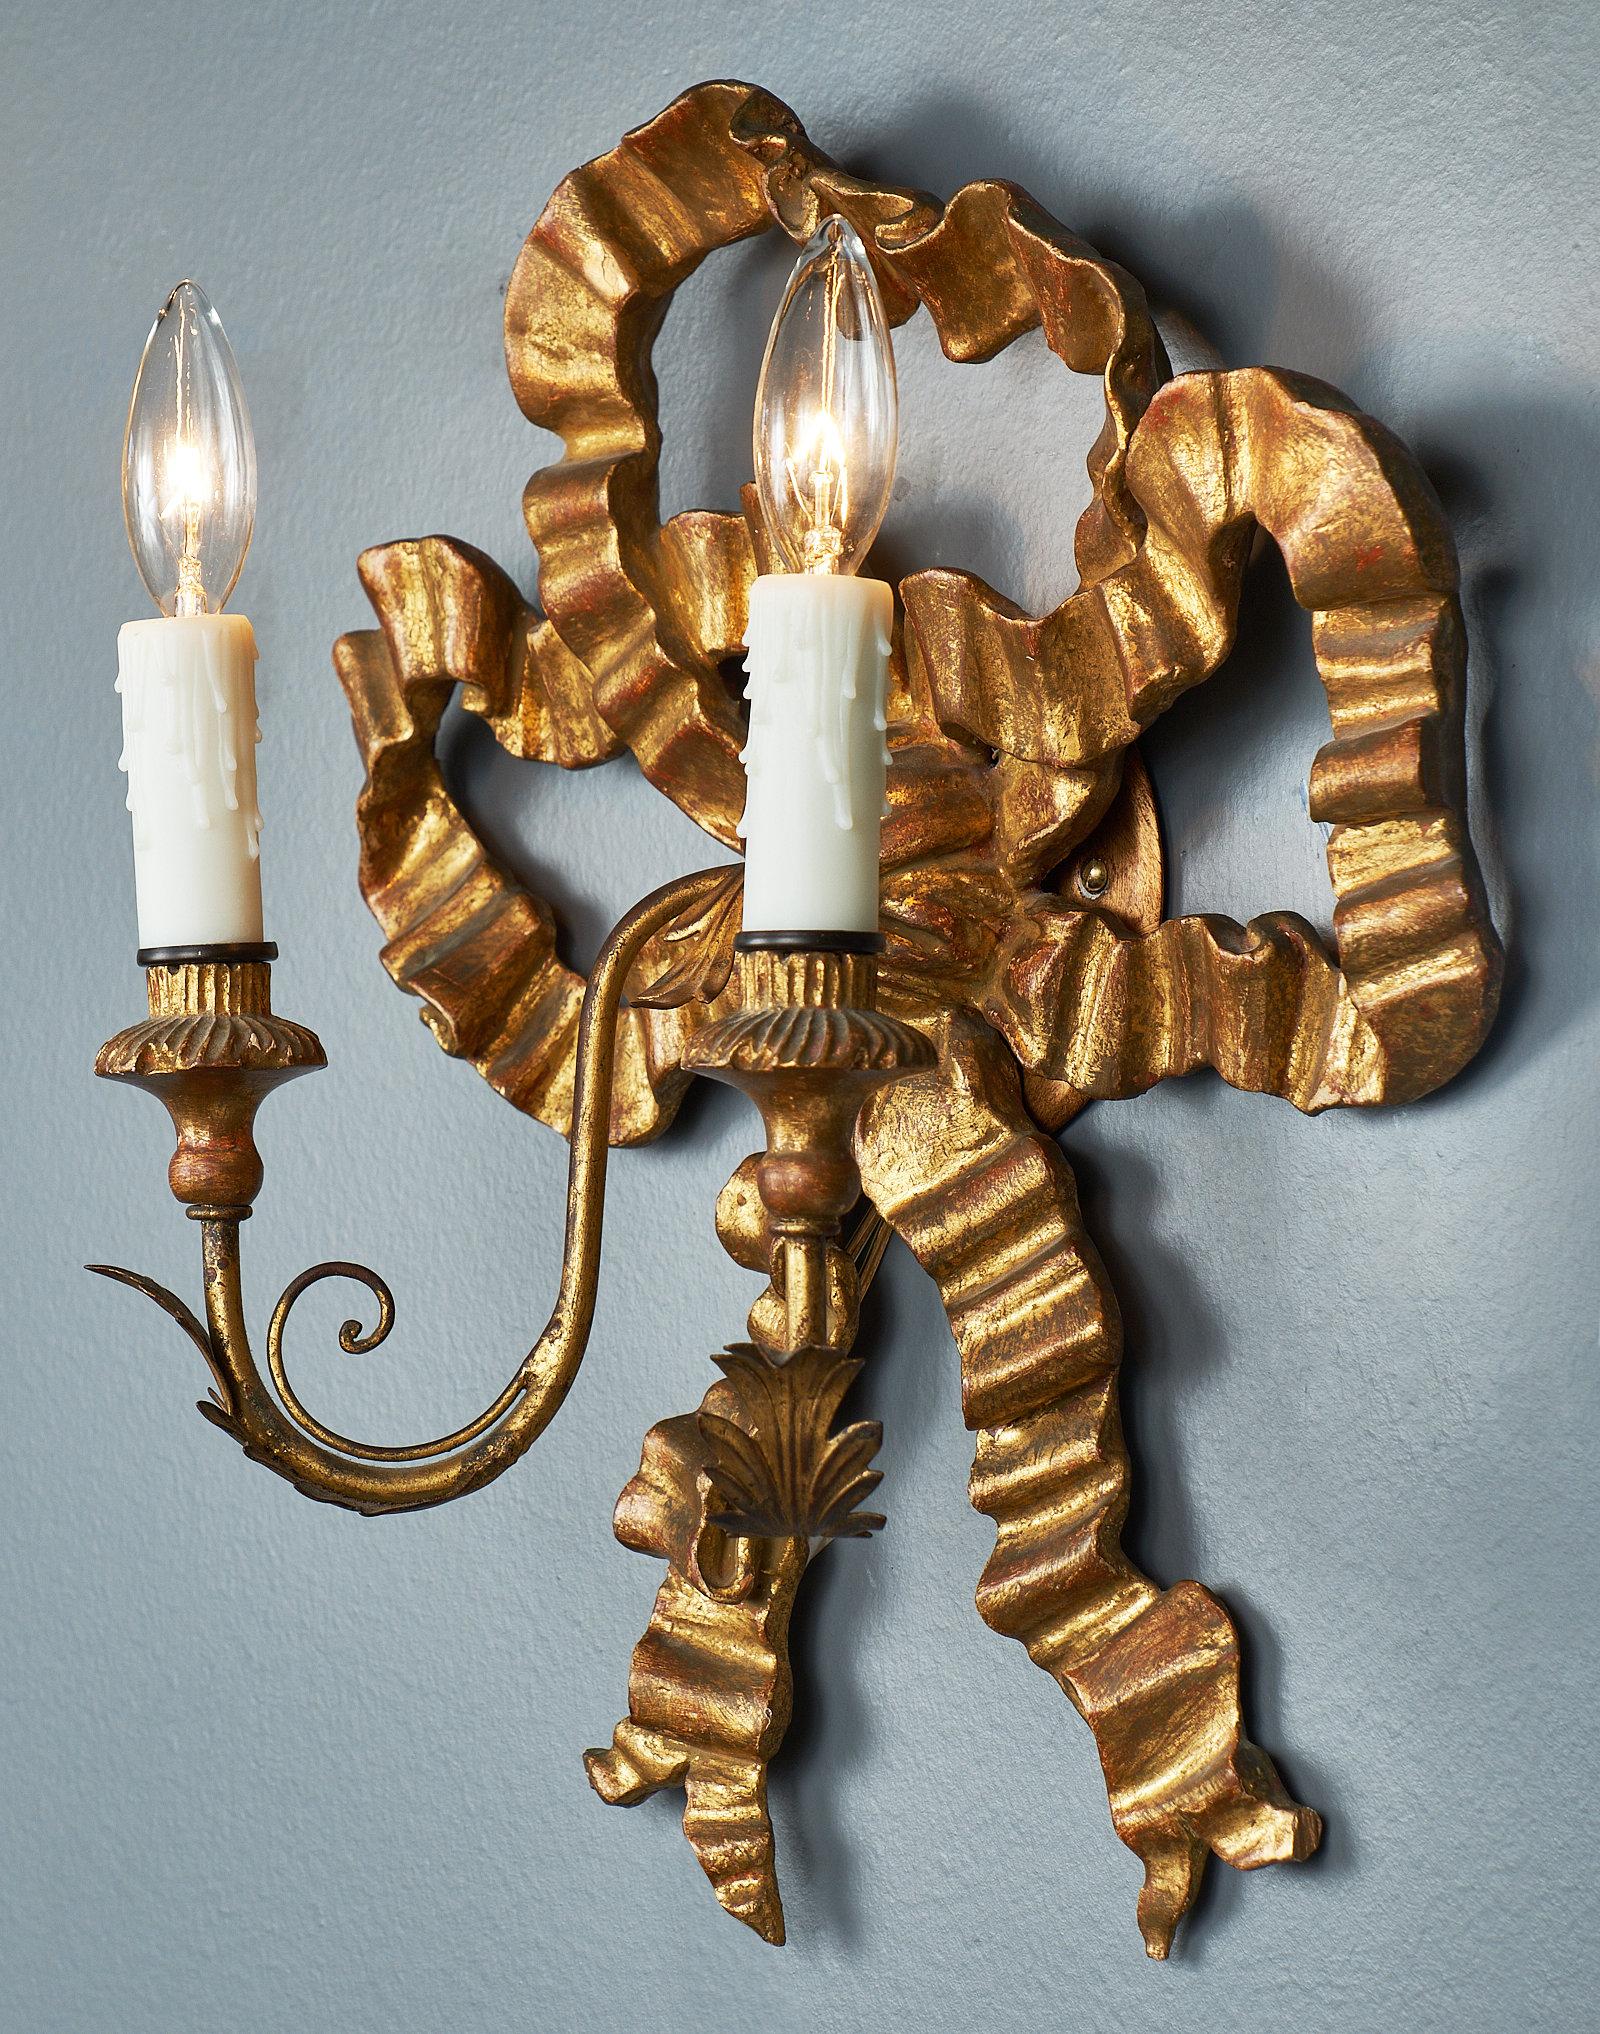 A pair of antique Louis XVI style gold bow sconces from France. Each piece features a 23-carat gold leafed neoclassical finely detailed bow and two gold leafed arms with candlelight sockets, rewired to US standards.